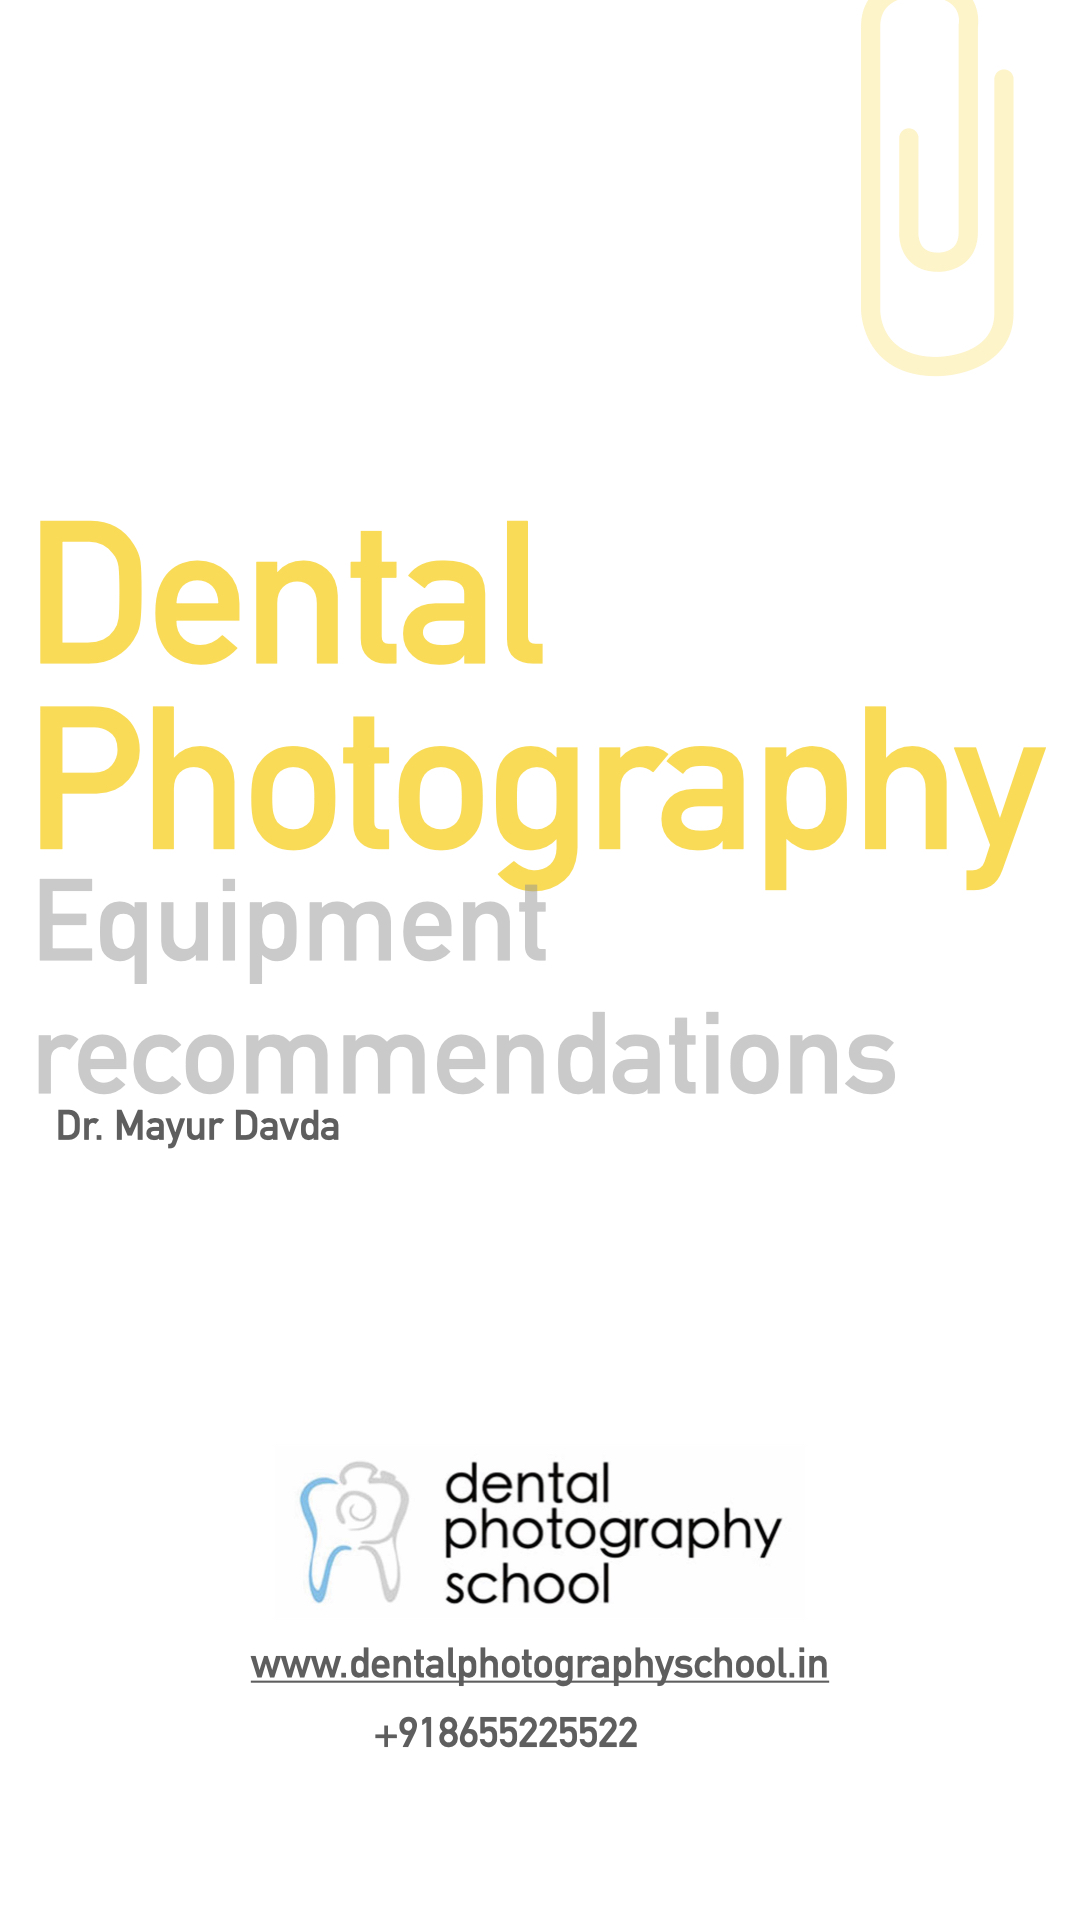 Free e book download for dental photography camera recommendation